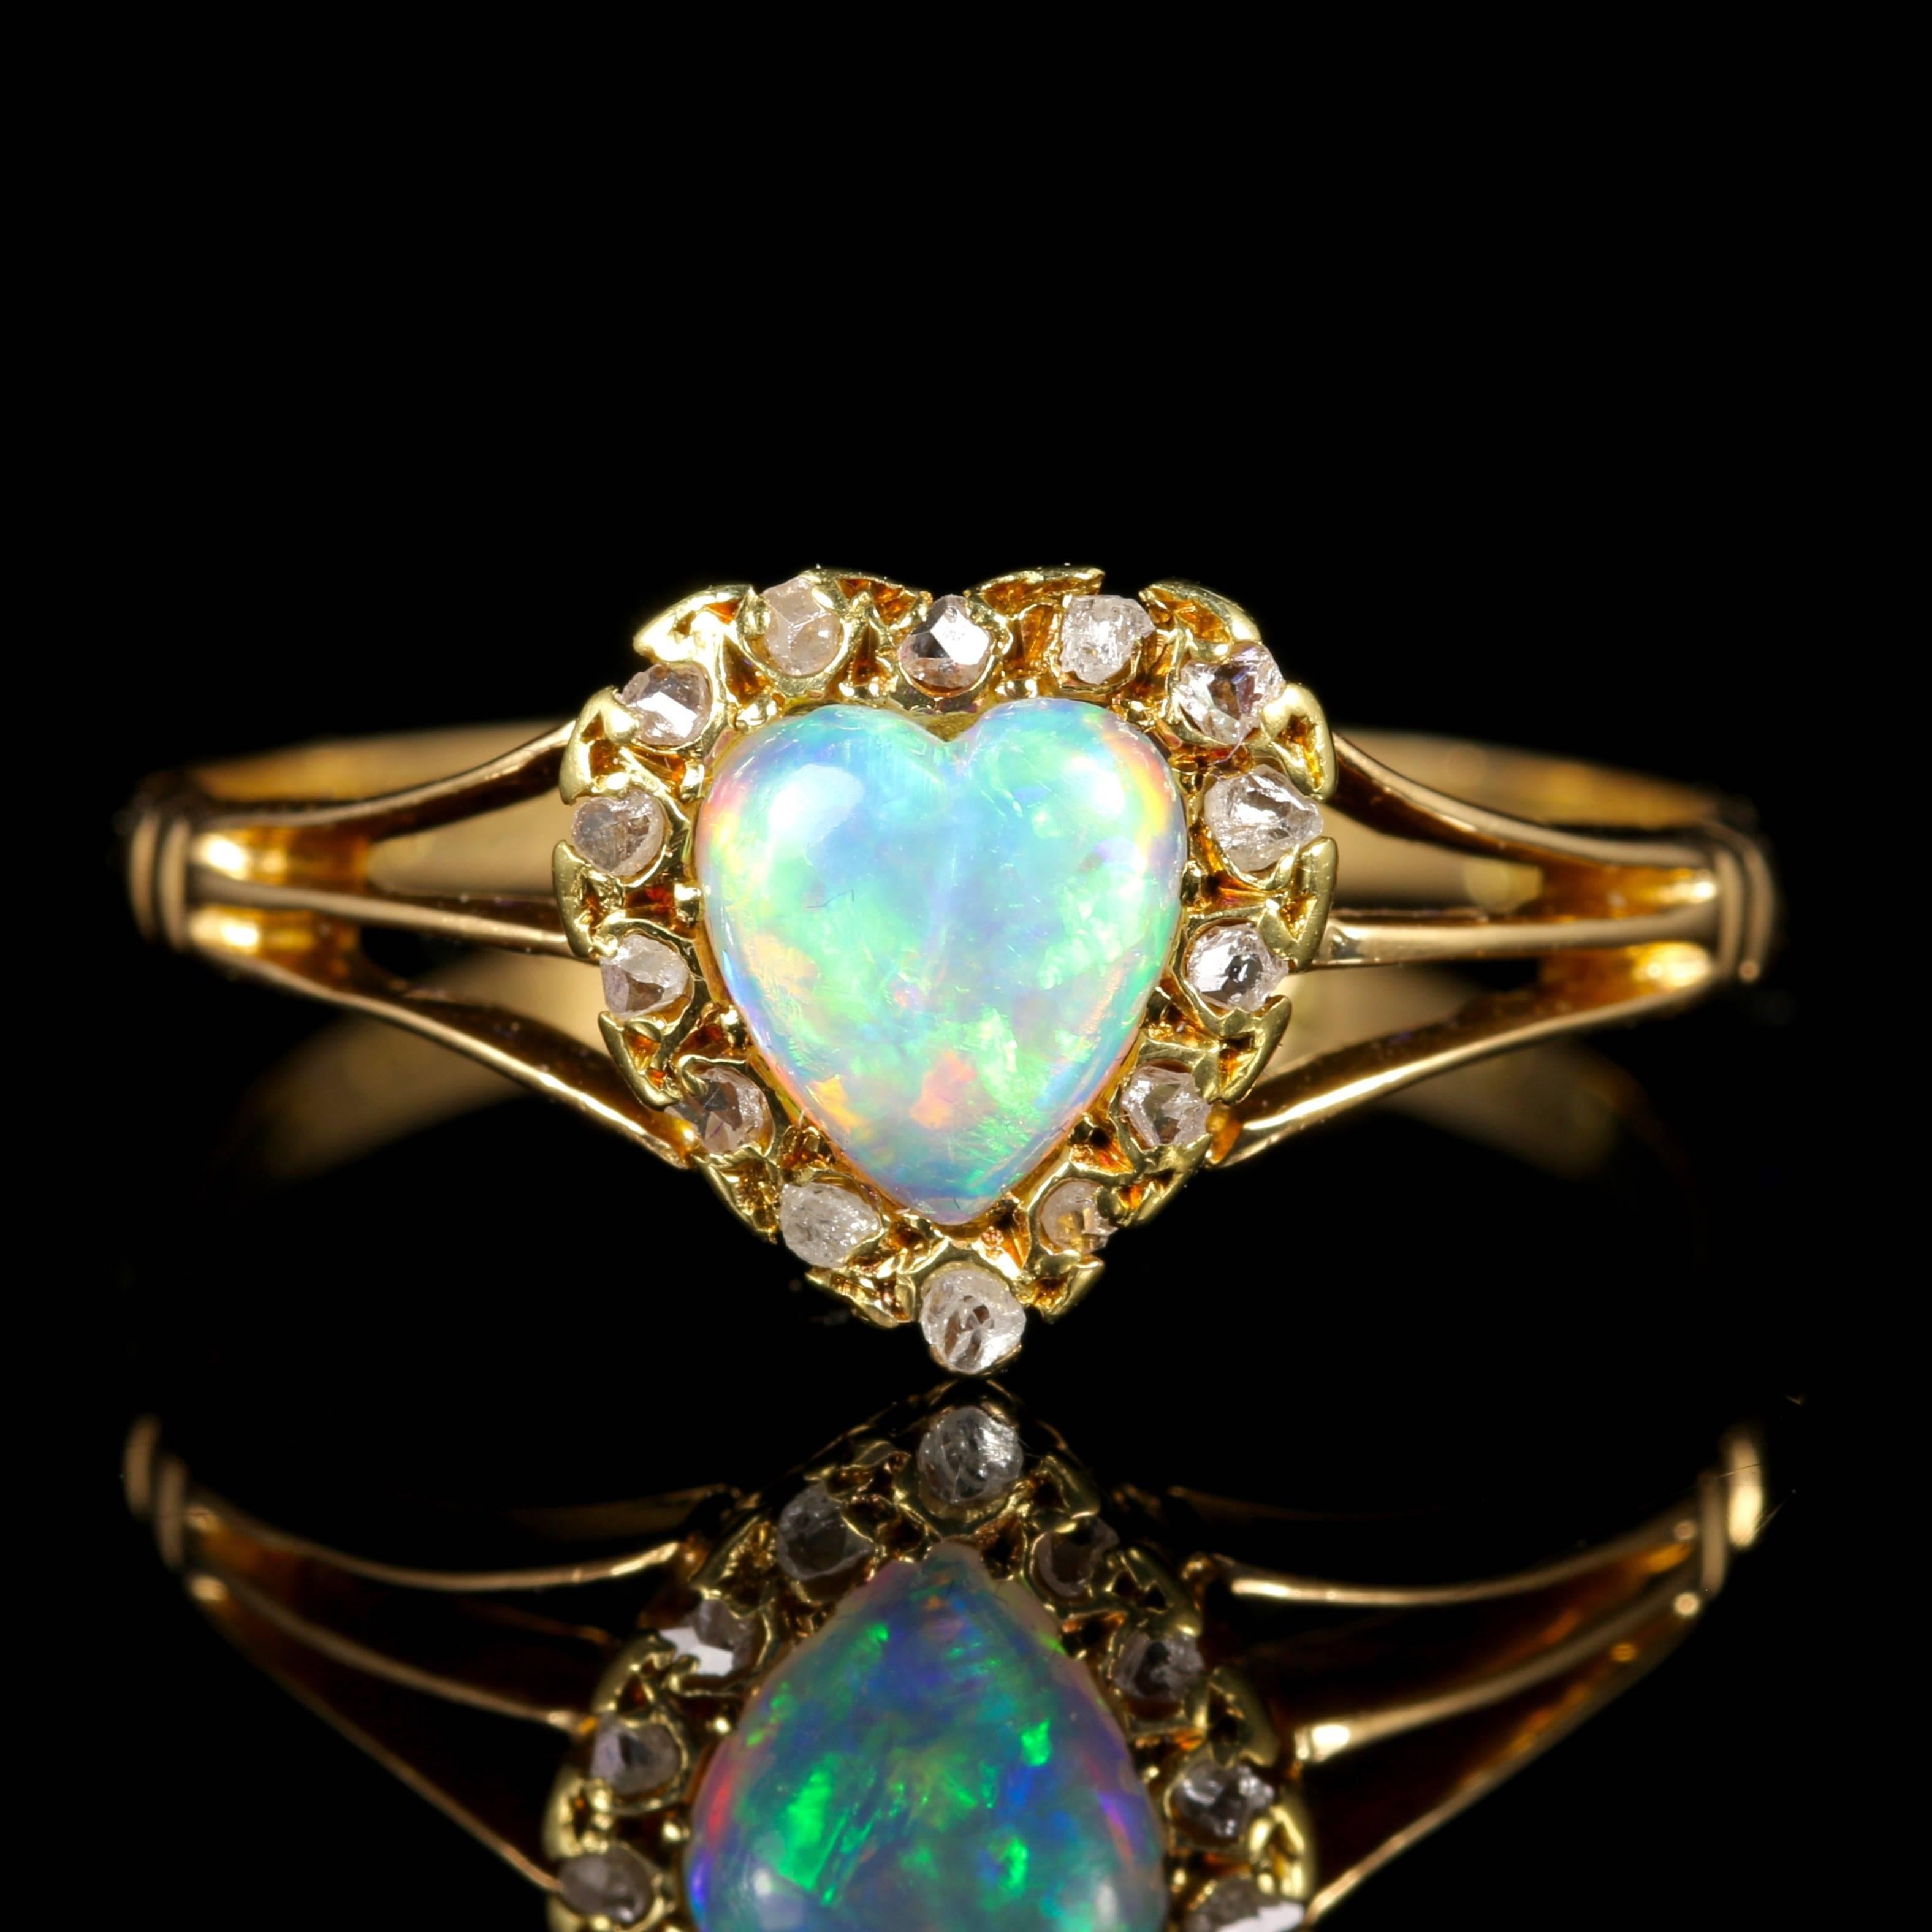 This has to be one of the sweetest Edwardian heart Opal and rose cut Diamond rings we have exhibited for sale in its original box.

Fully hallmarked Chester 1908.

A fabulous Victorian 18ct Yellow Gold ring which depicts a rich coloured natural Opal